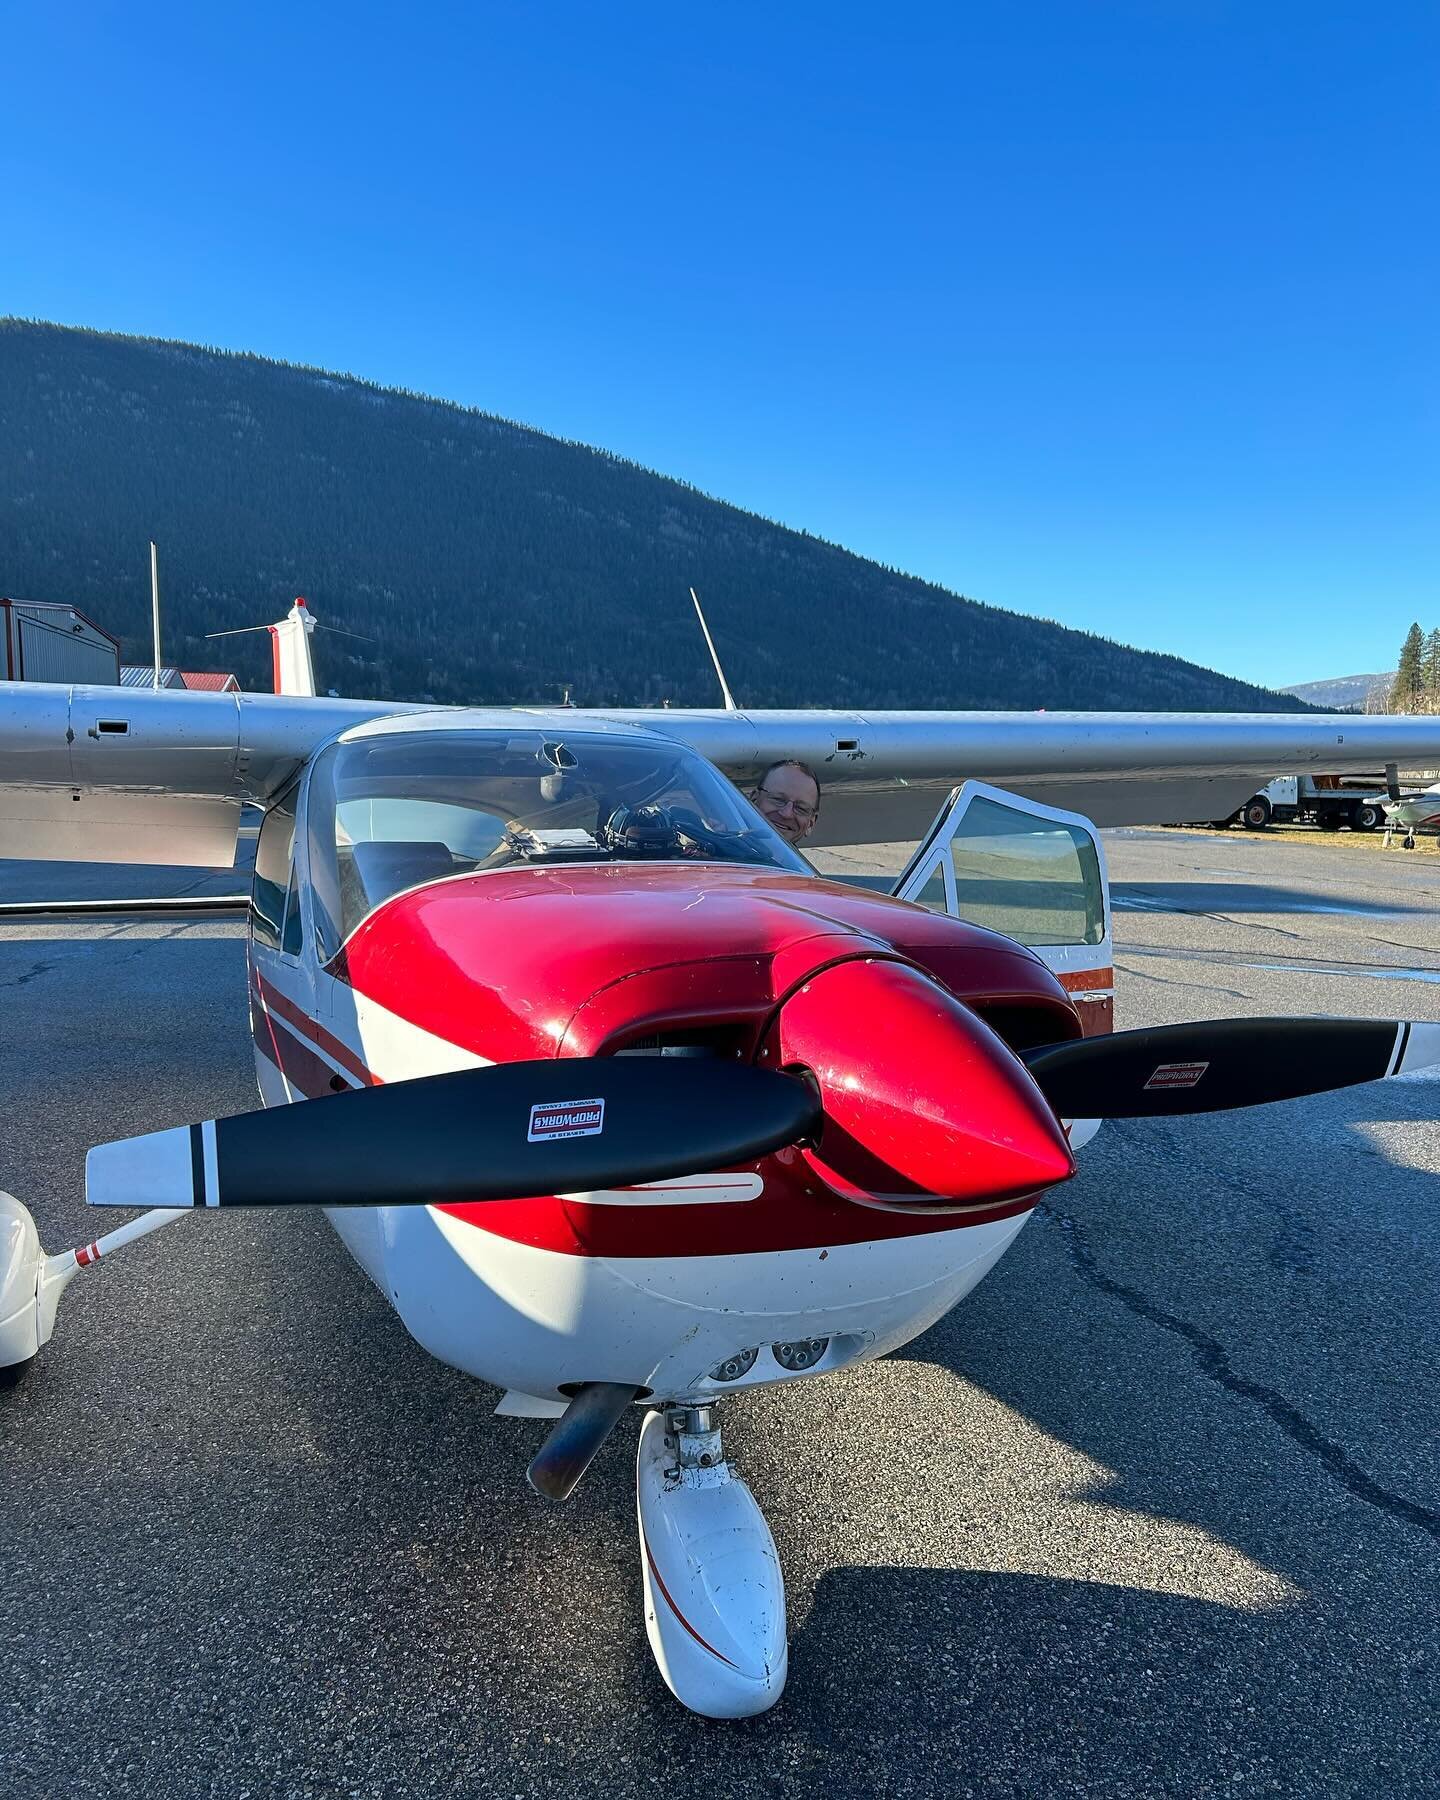 In 1978, I went to Glider Pilot school with Mark and we&rsquo;re still friends! He lives in Nelson too. He called up this morning and asked if I felt like going flying today. AHEM! YES! Epic day for flying in the Kootenay&rsquo;s. Thank you, Captain 